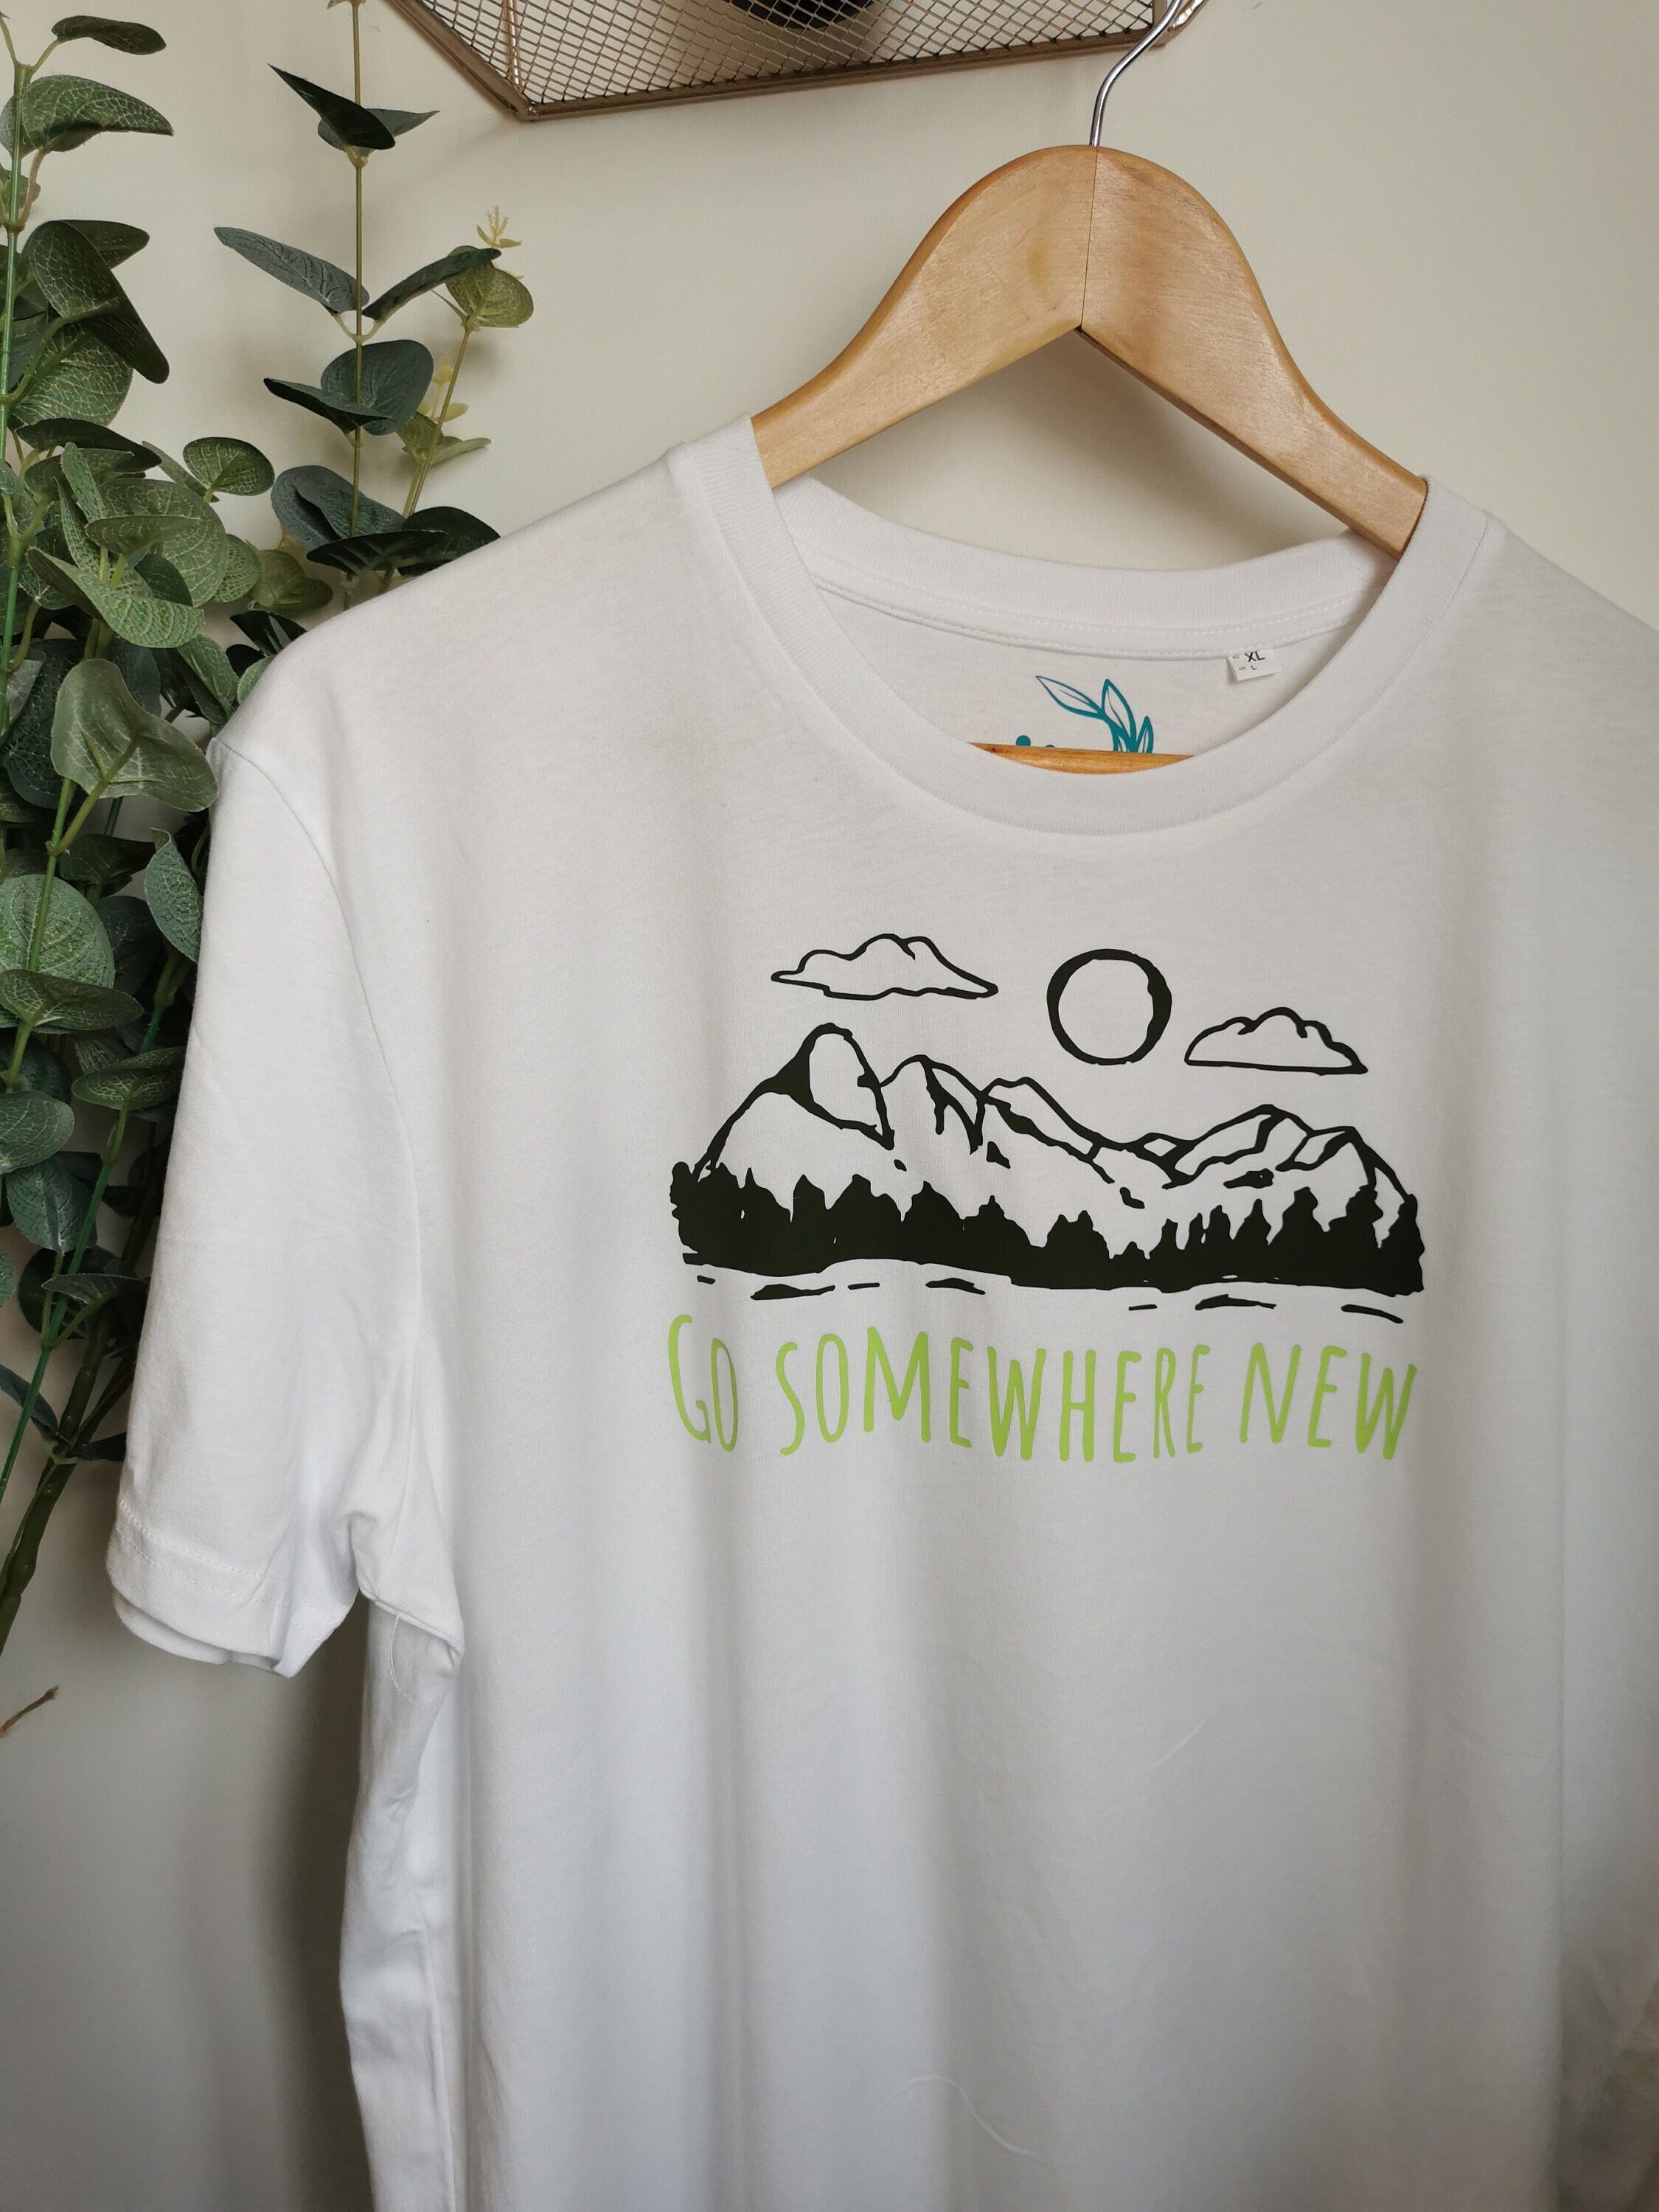 Go Somewhere New White Organic T-shirt, Valentine Hikingwear, Travel, Unique Gift - Clothing, Outdoor Life, Van Gifts, Cotton Hiking Etsy Adventure